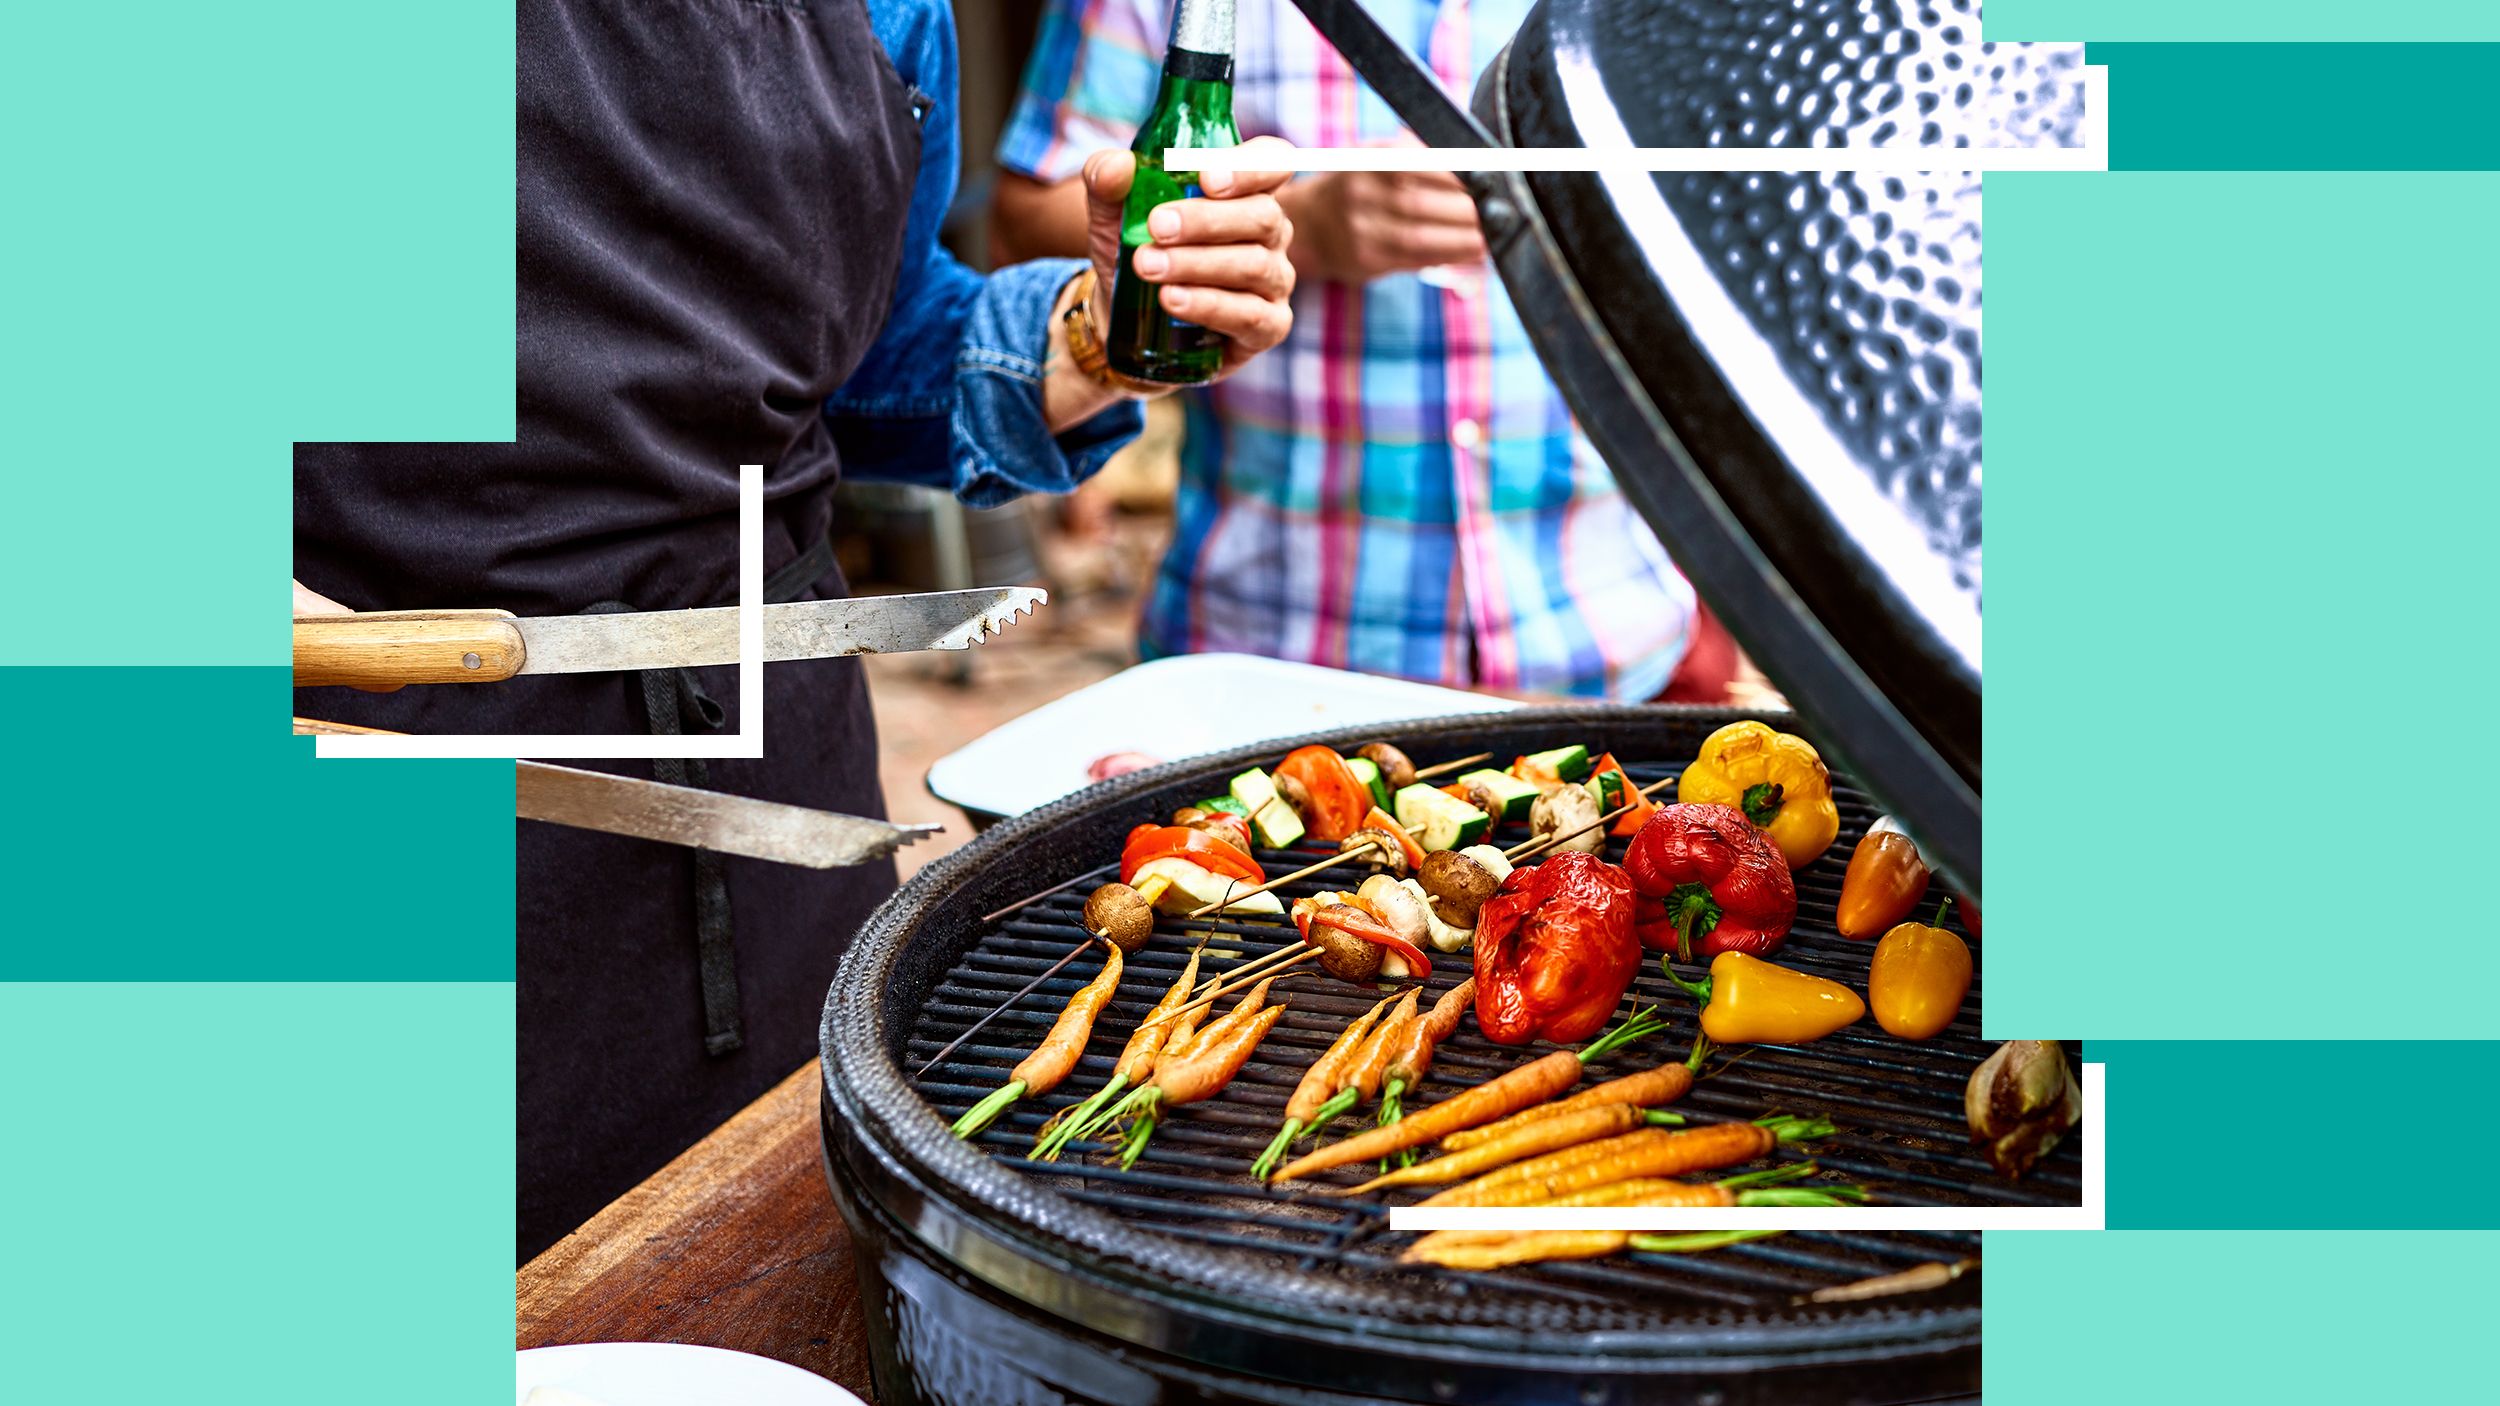 The 30 Best Grilling Gifts for the BBQ Enthusiast of